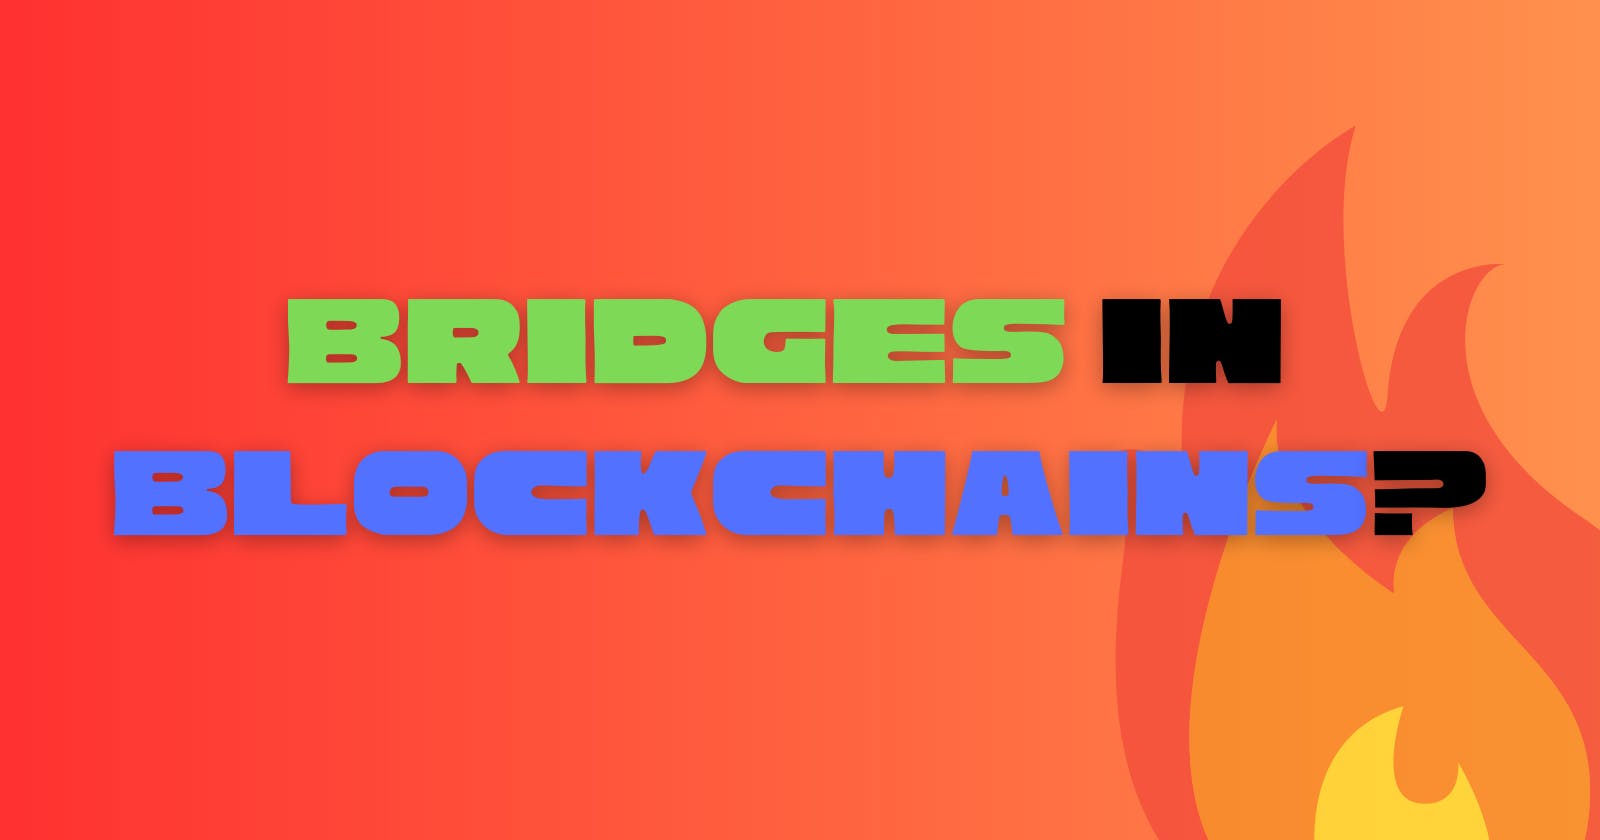 Unlock the Full Potential of Blockchain Ecosystems with Blockchain Bridges: Learn How to Transfer Assets and Information Across Multiple Chains